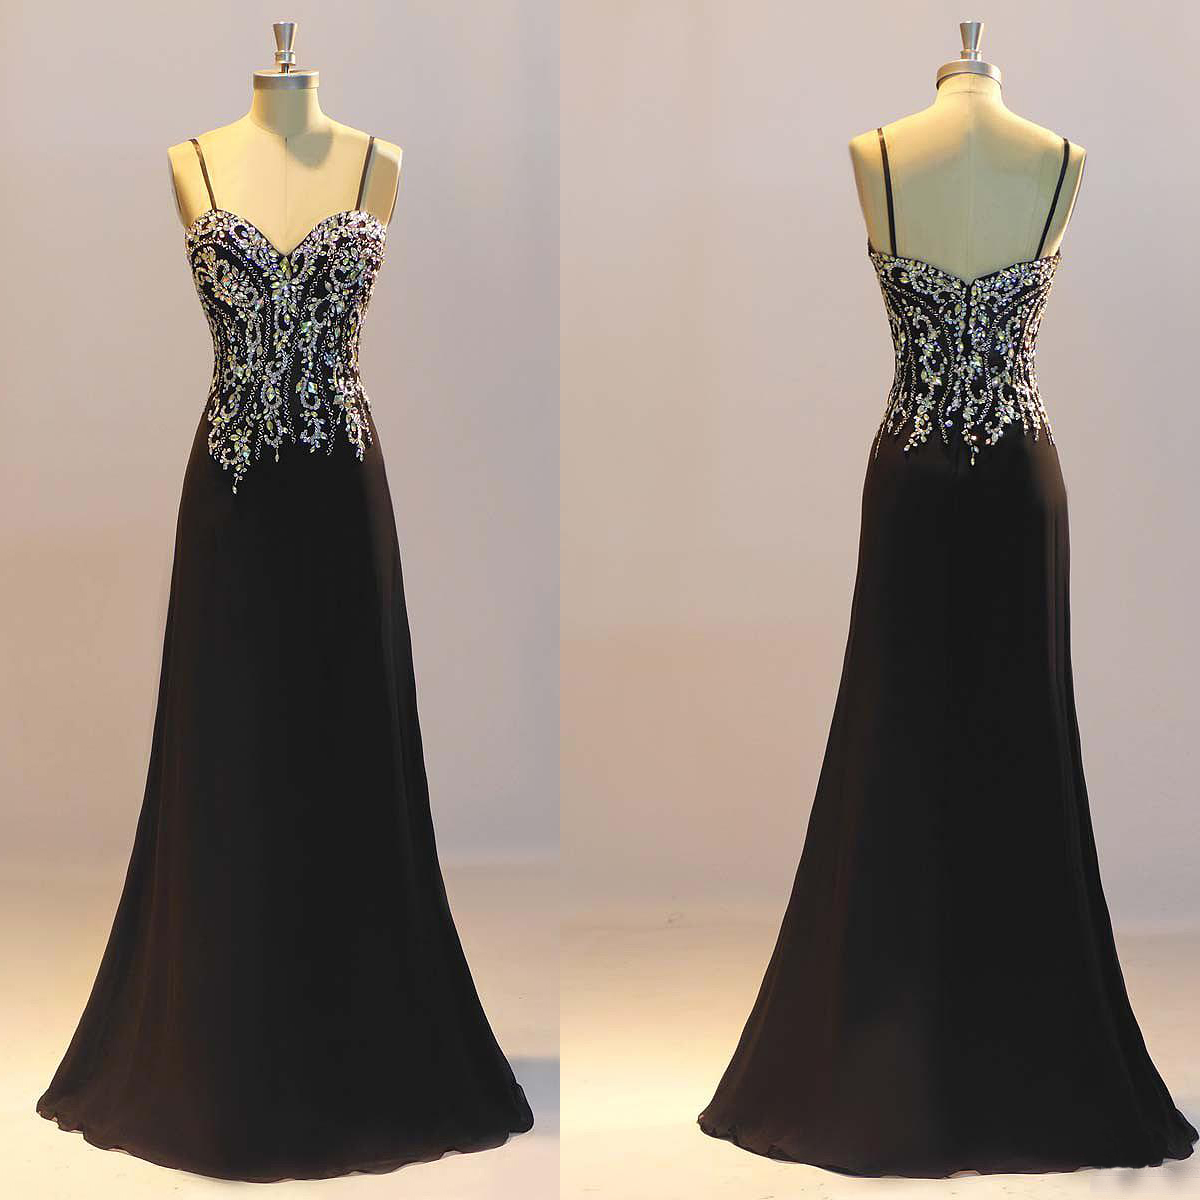 Black A-line Beaded Spaghetti Strap Floor Length Gown, Black Evening Gowns, Elegant Party Dress